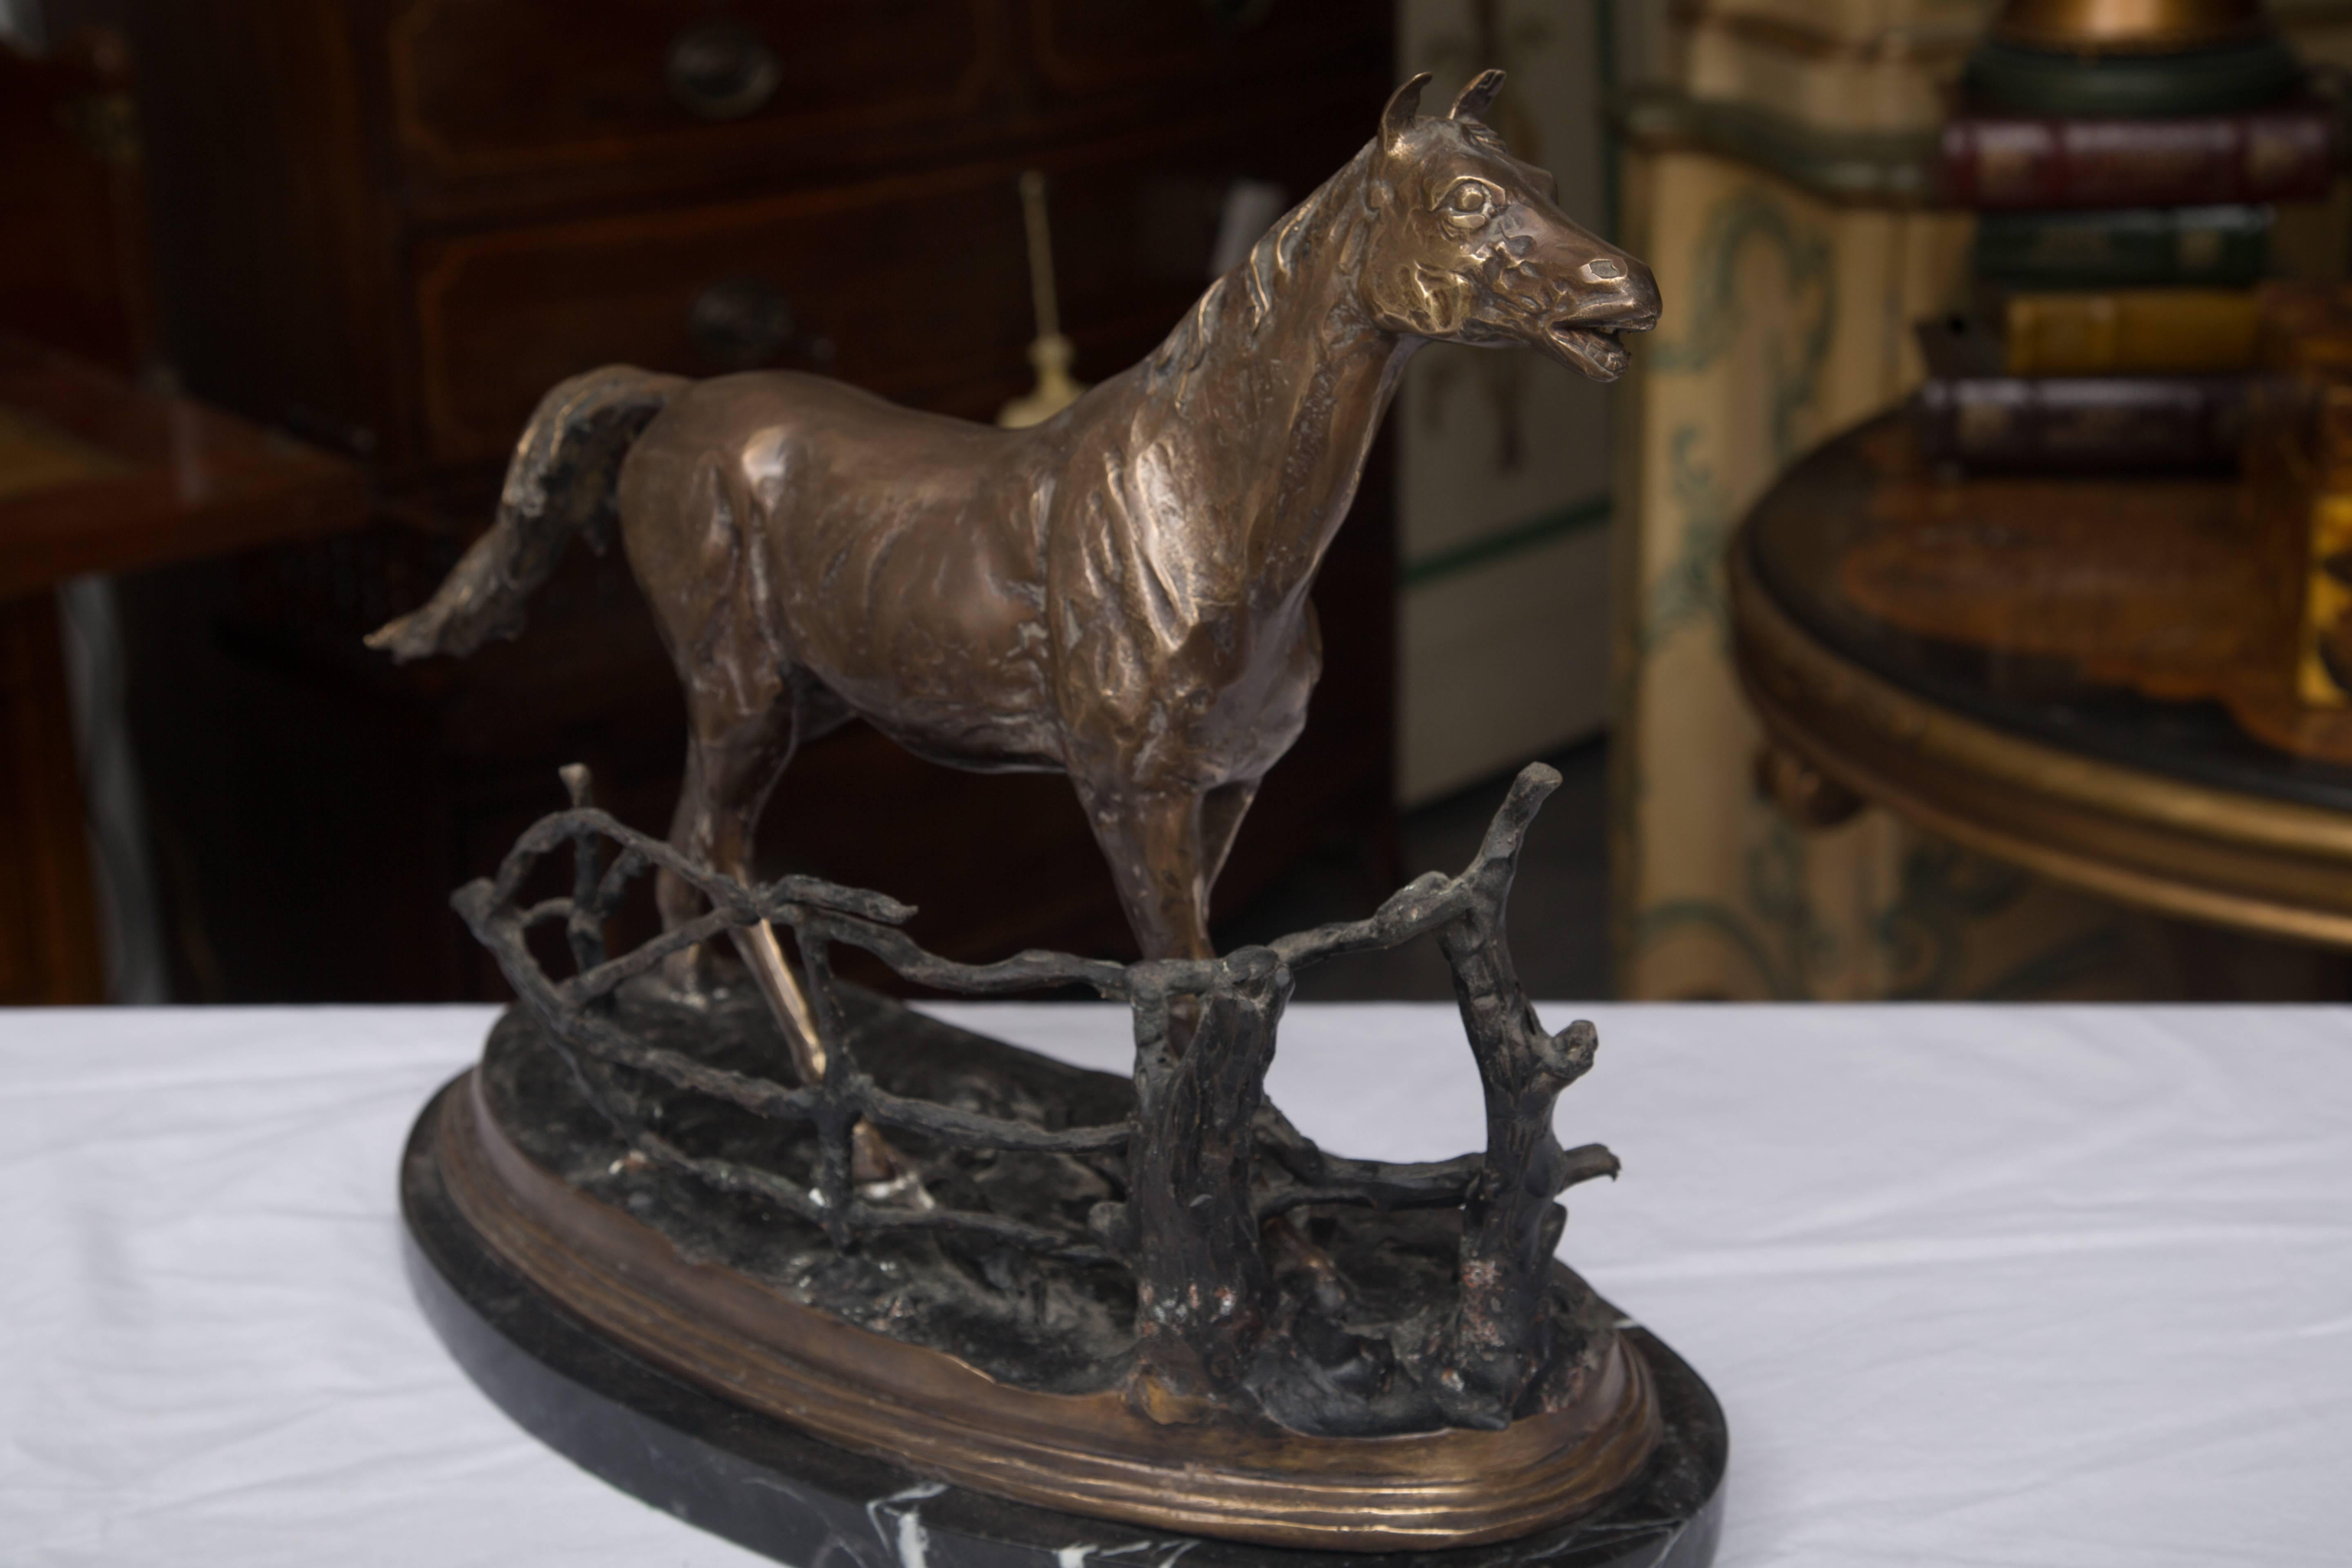 This nicely crafted model of a horse in full pose is situated behind natural fencing and is accented by a conforming marble base, mid-20th century.